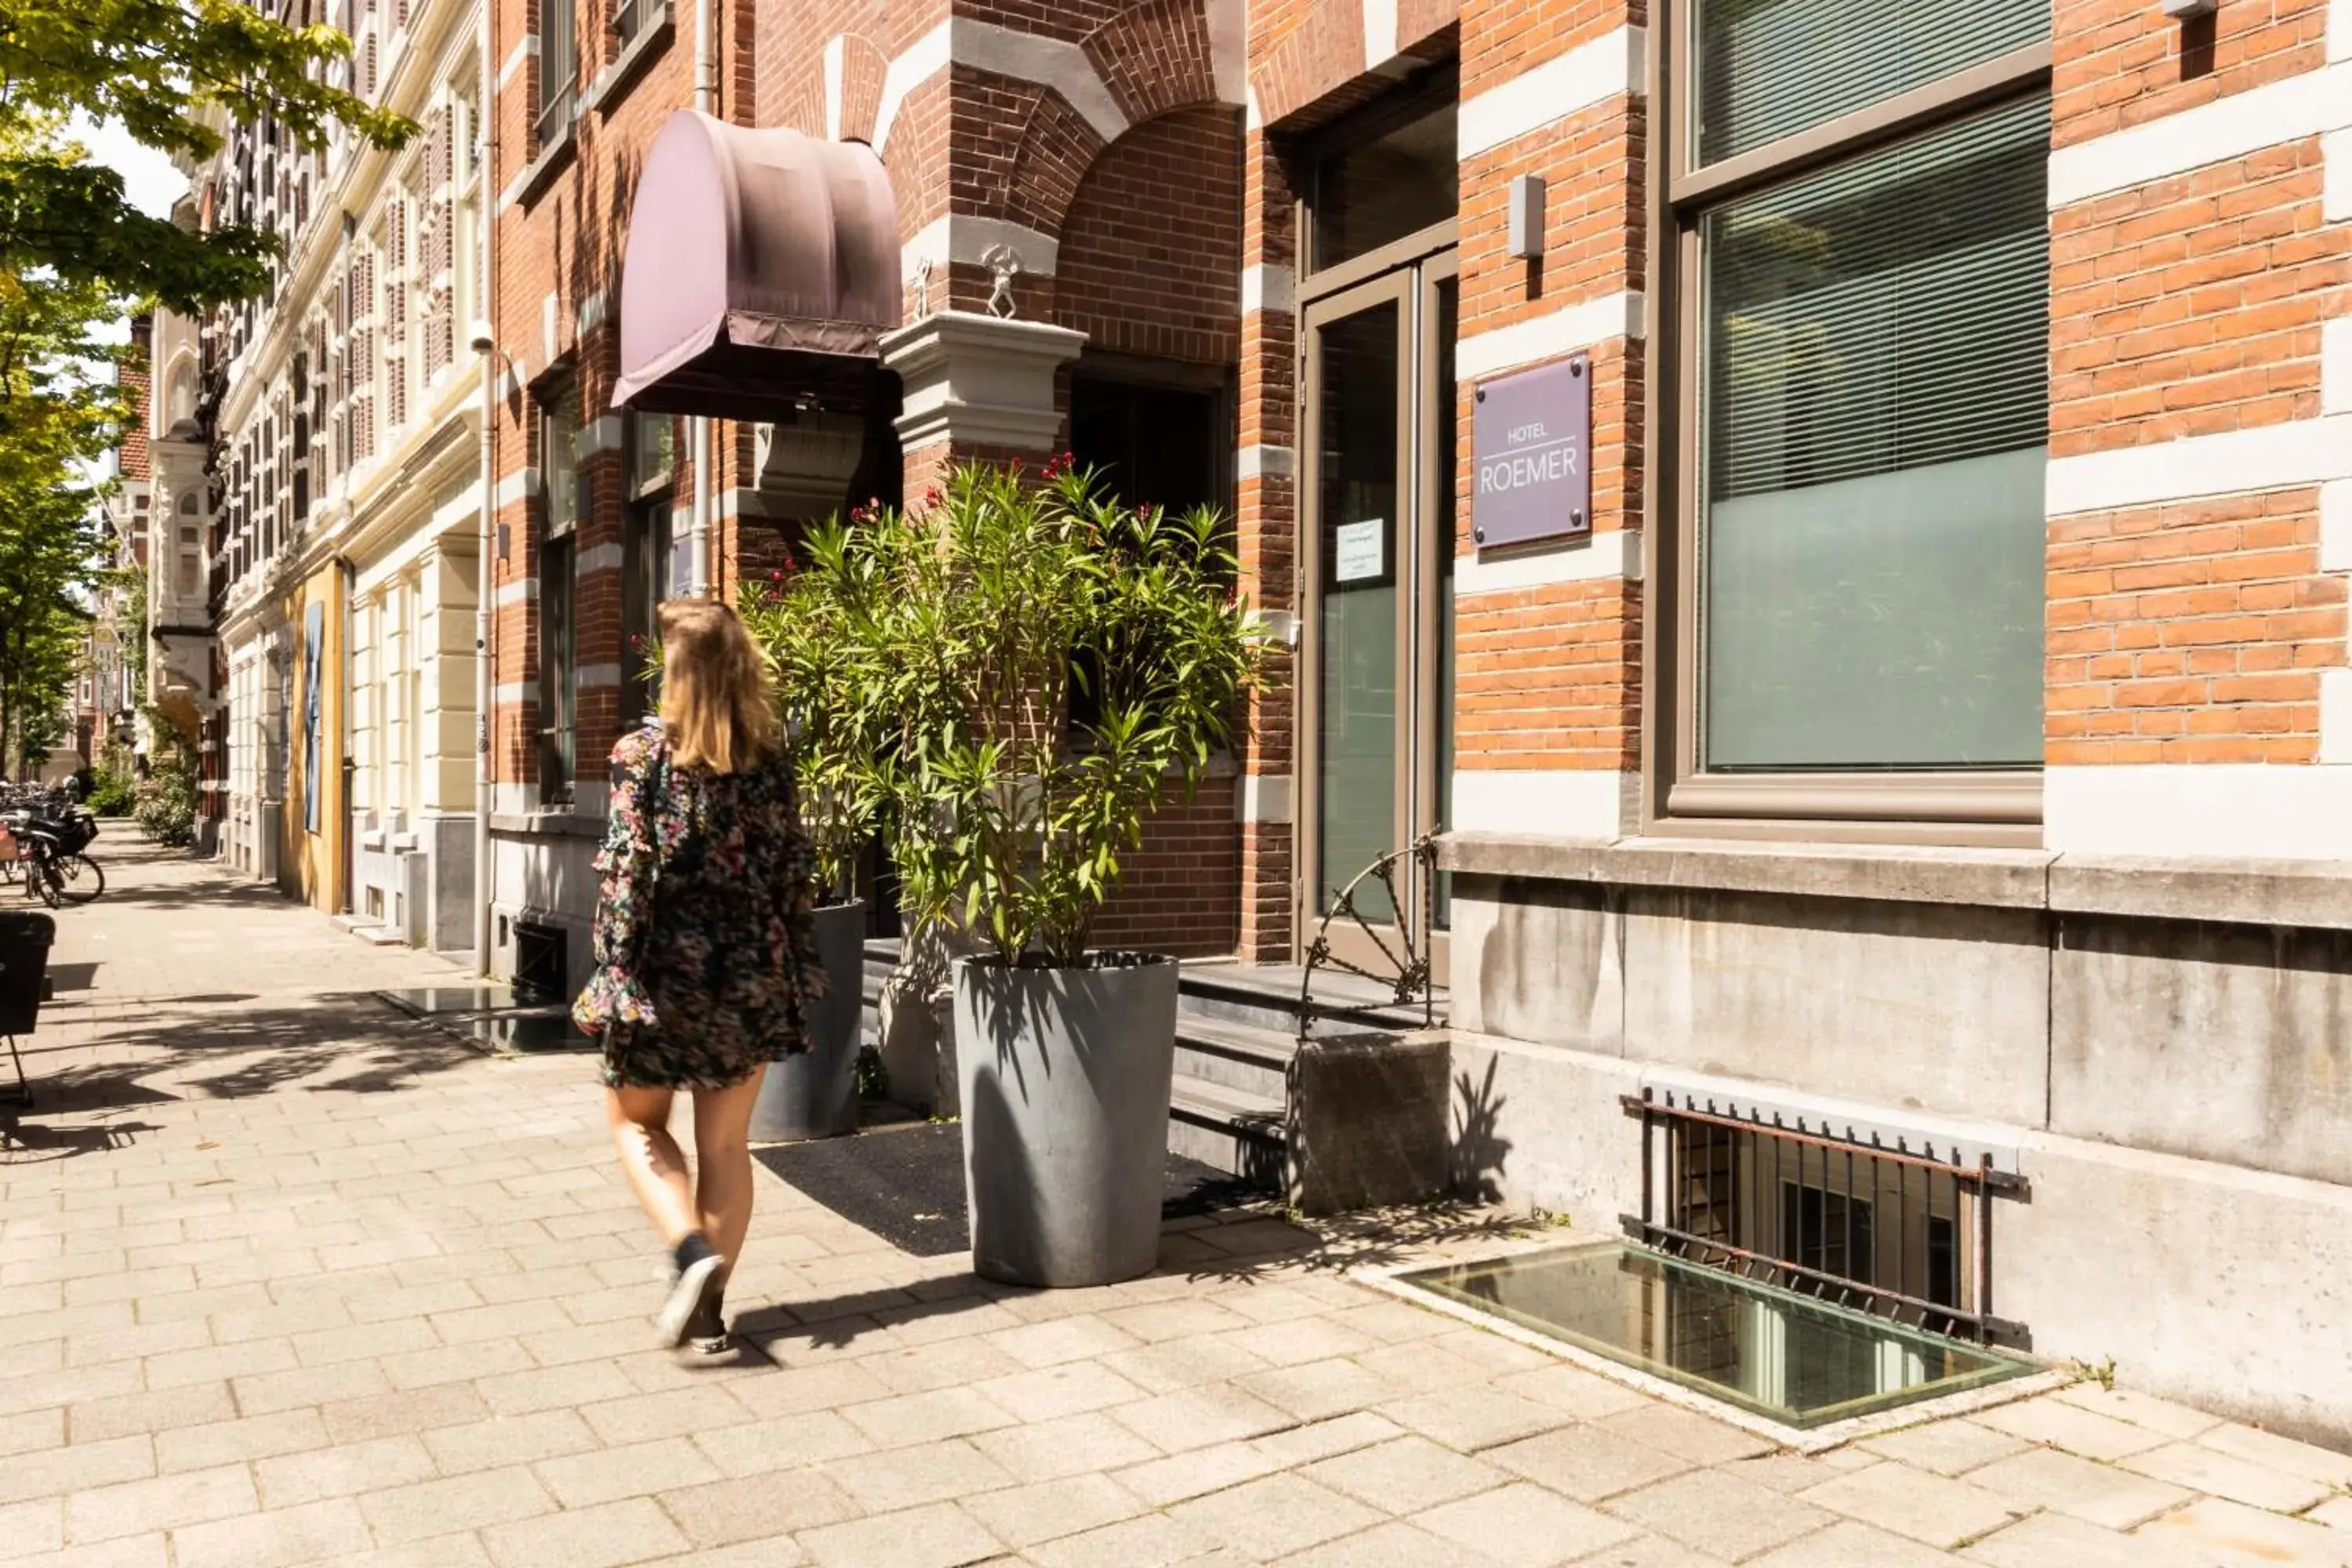 Property building in Hotel Roemer Amsterdam